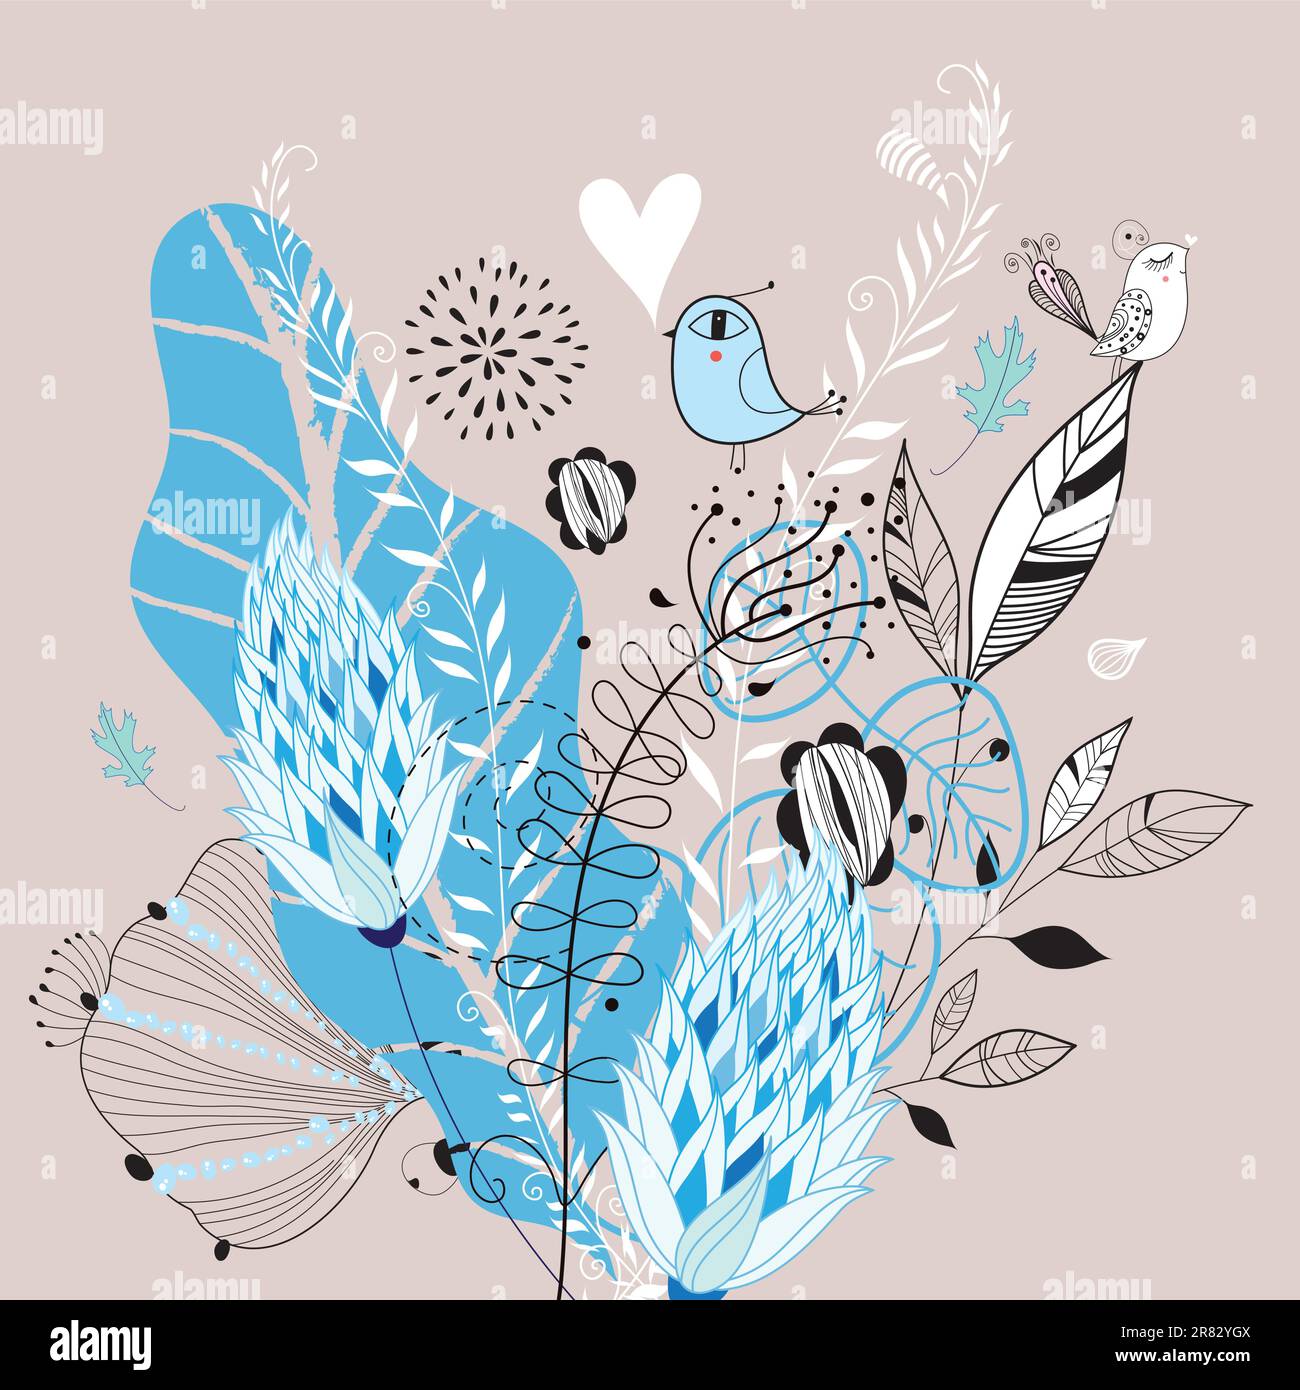 blue floral graphic design with loving birds Stock Vector